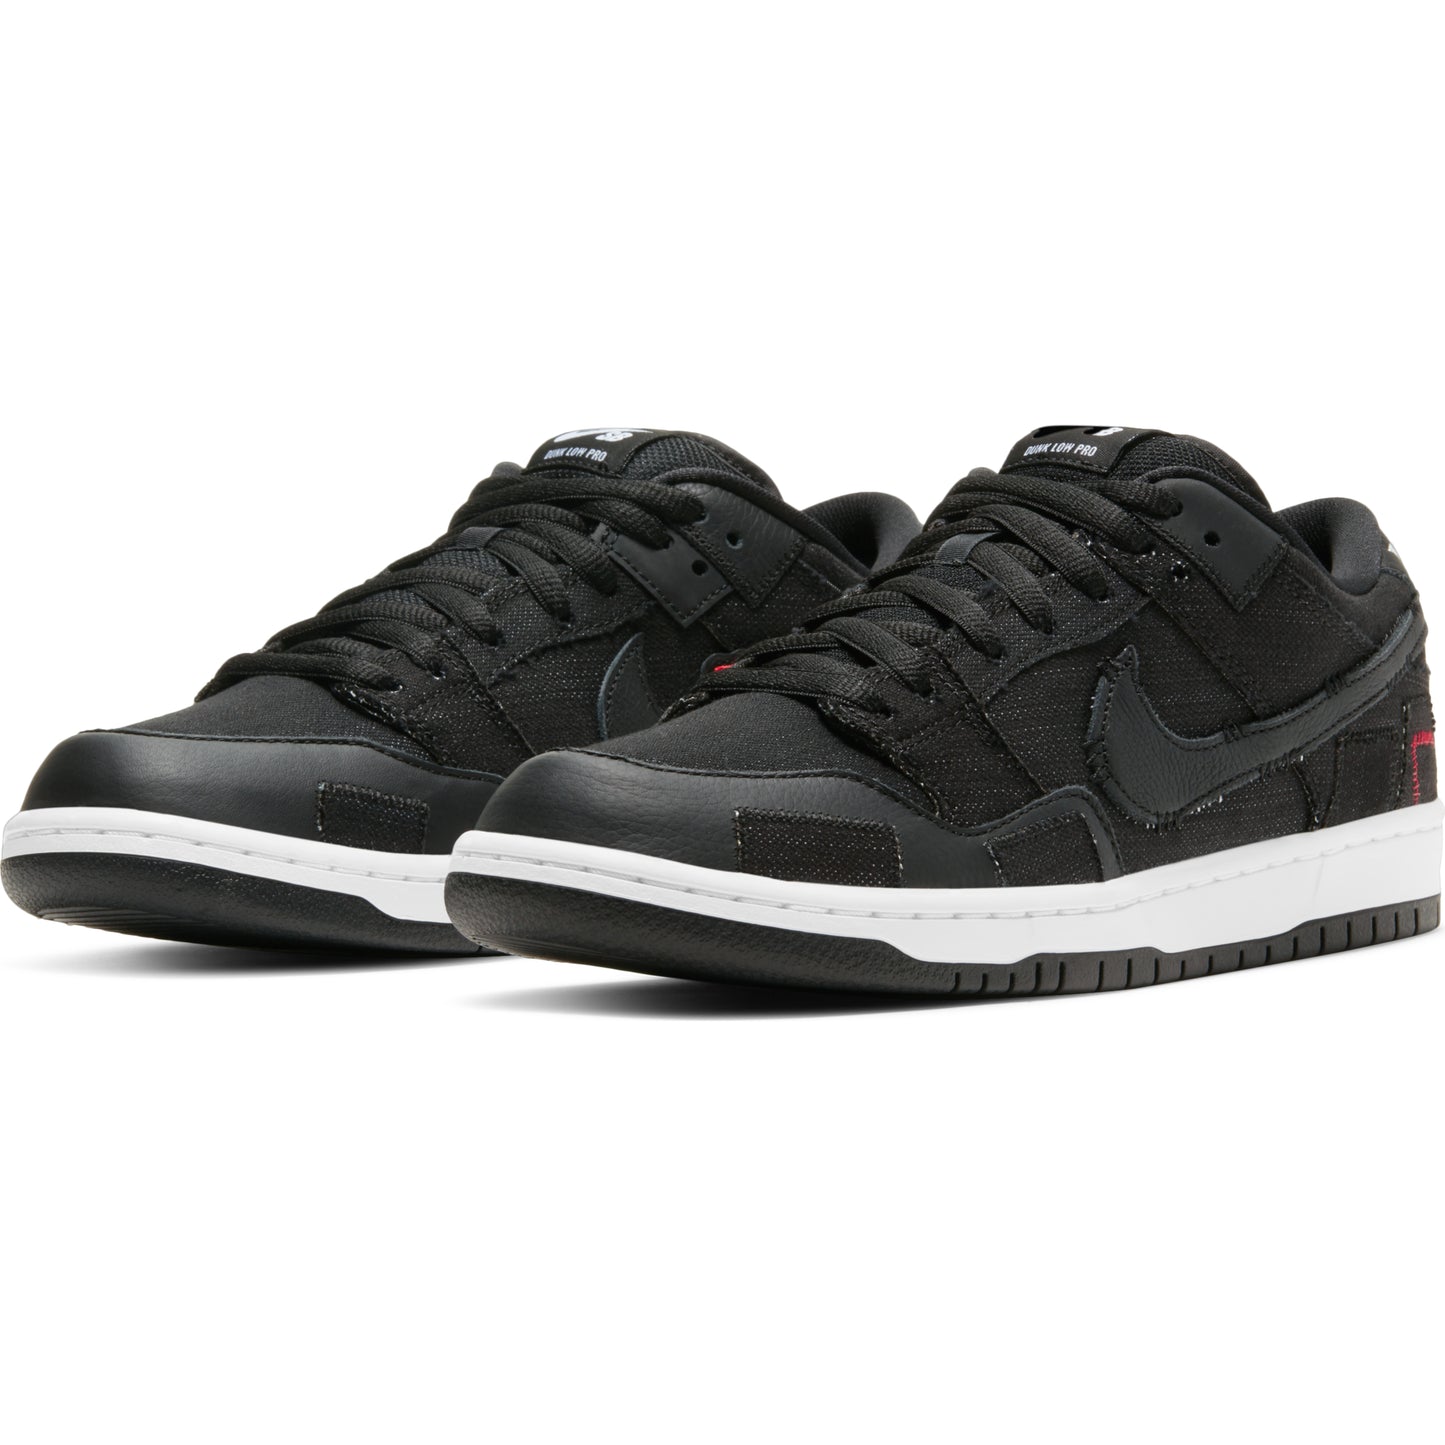 Nike SB x Wasted Youth Dunk Low Pro QS